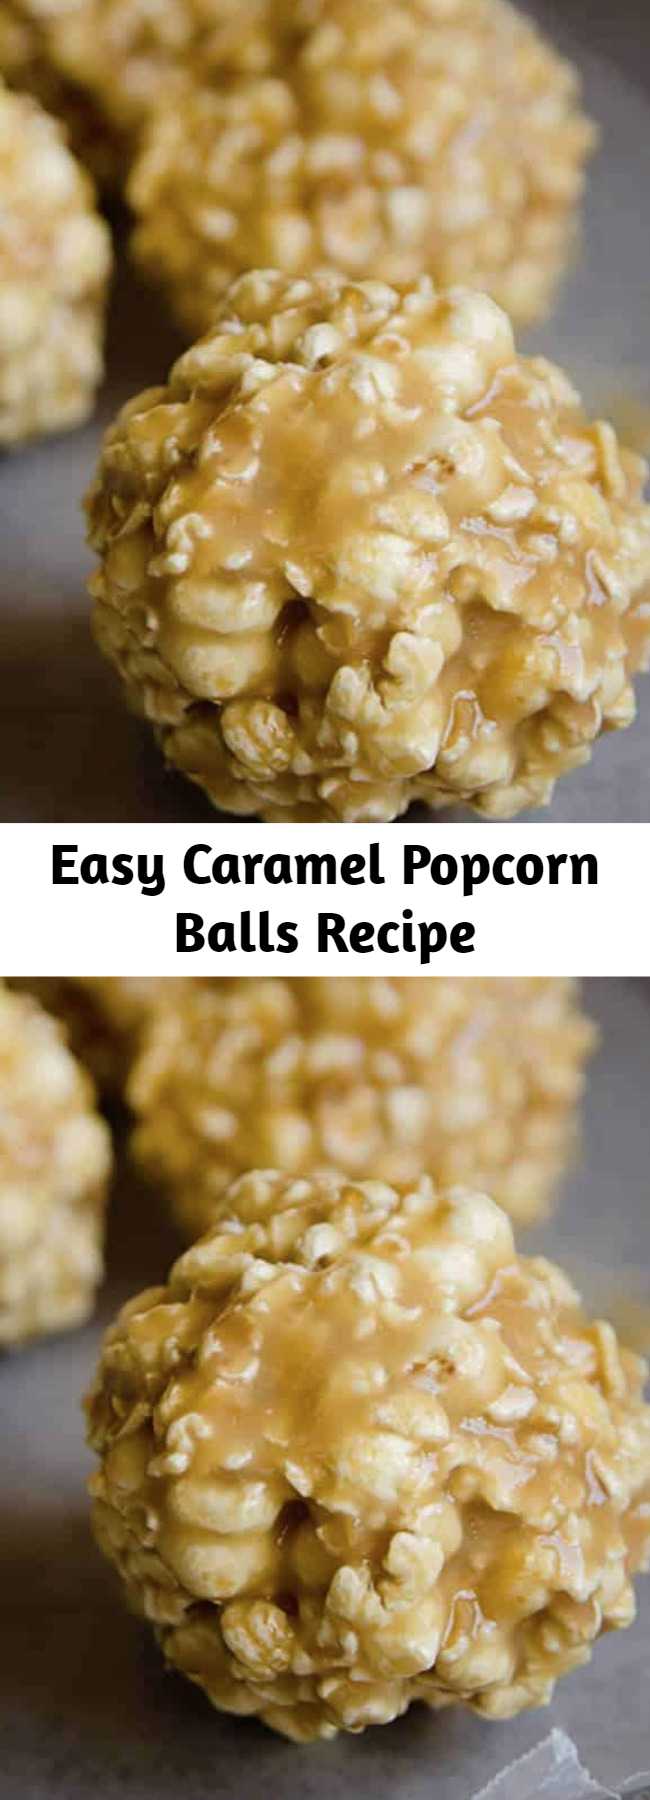 Easy Caramel Popcorn Balls Recipe - This ooey gooey caramel popcorn recipe is seriously the best! great flavor and easy to make. Perfect for party favors, friends and family. #partytreats #holidaygifts #caramelcorn #popcornballs